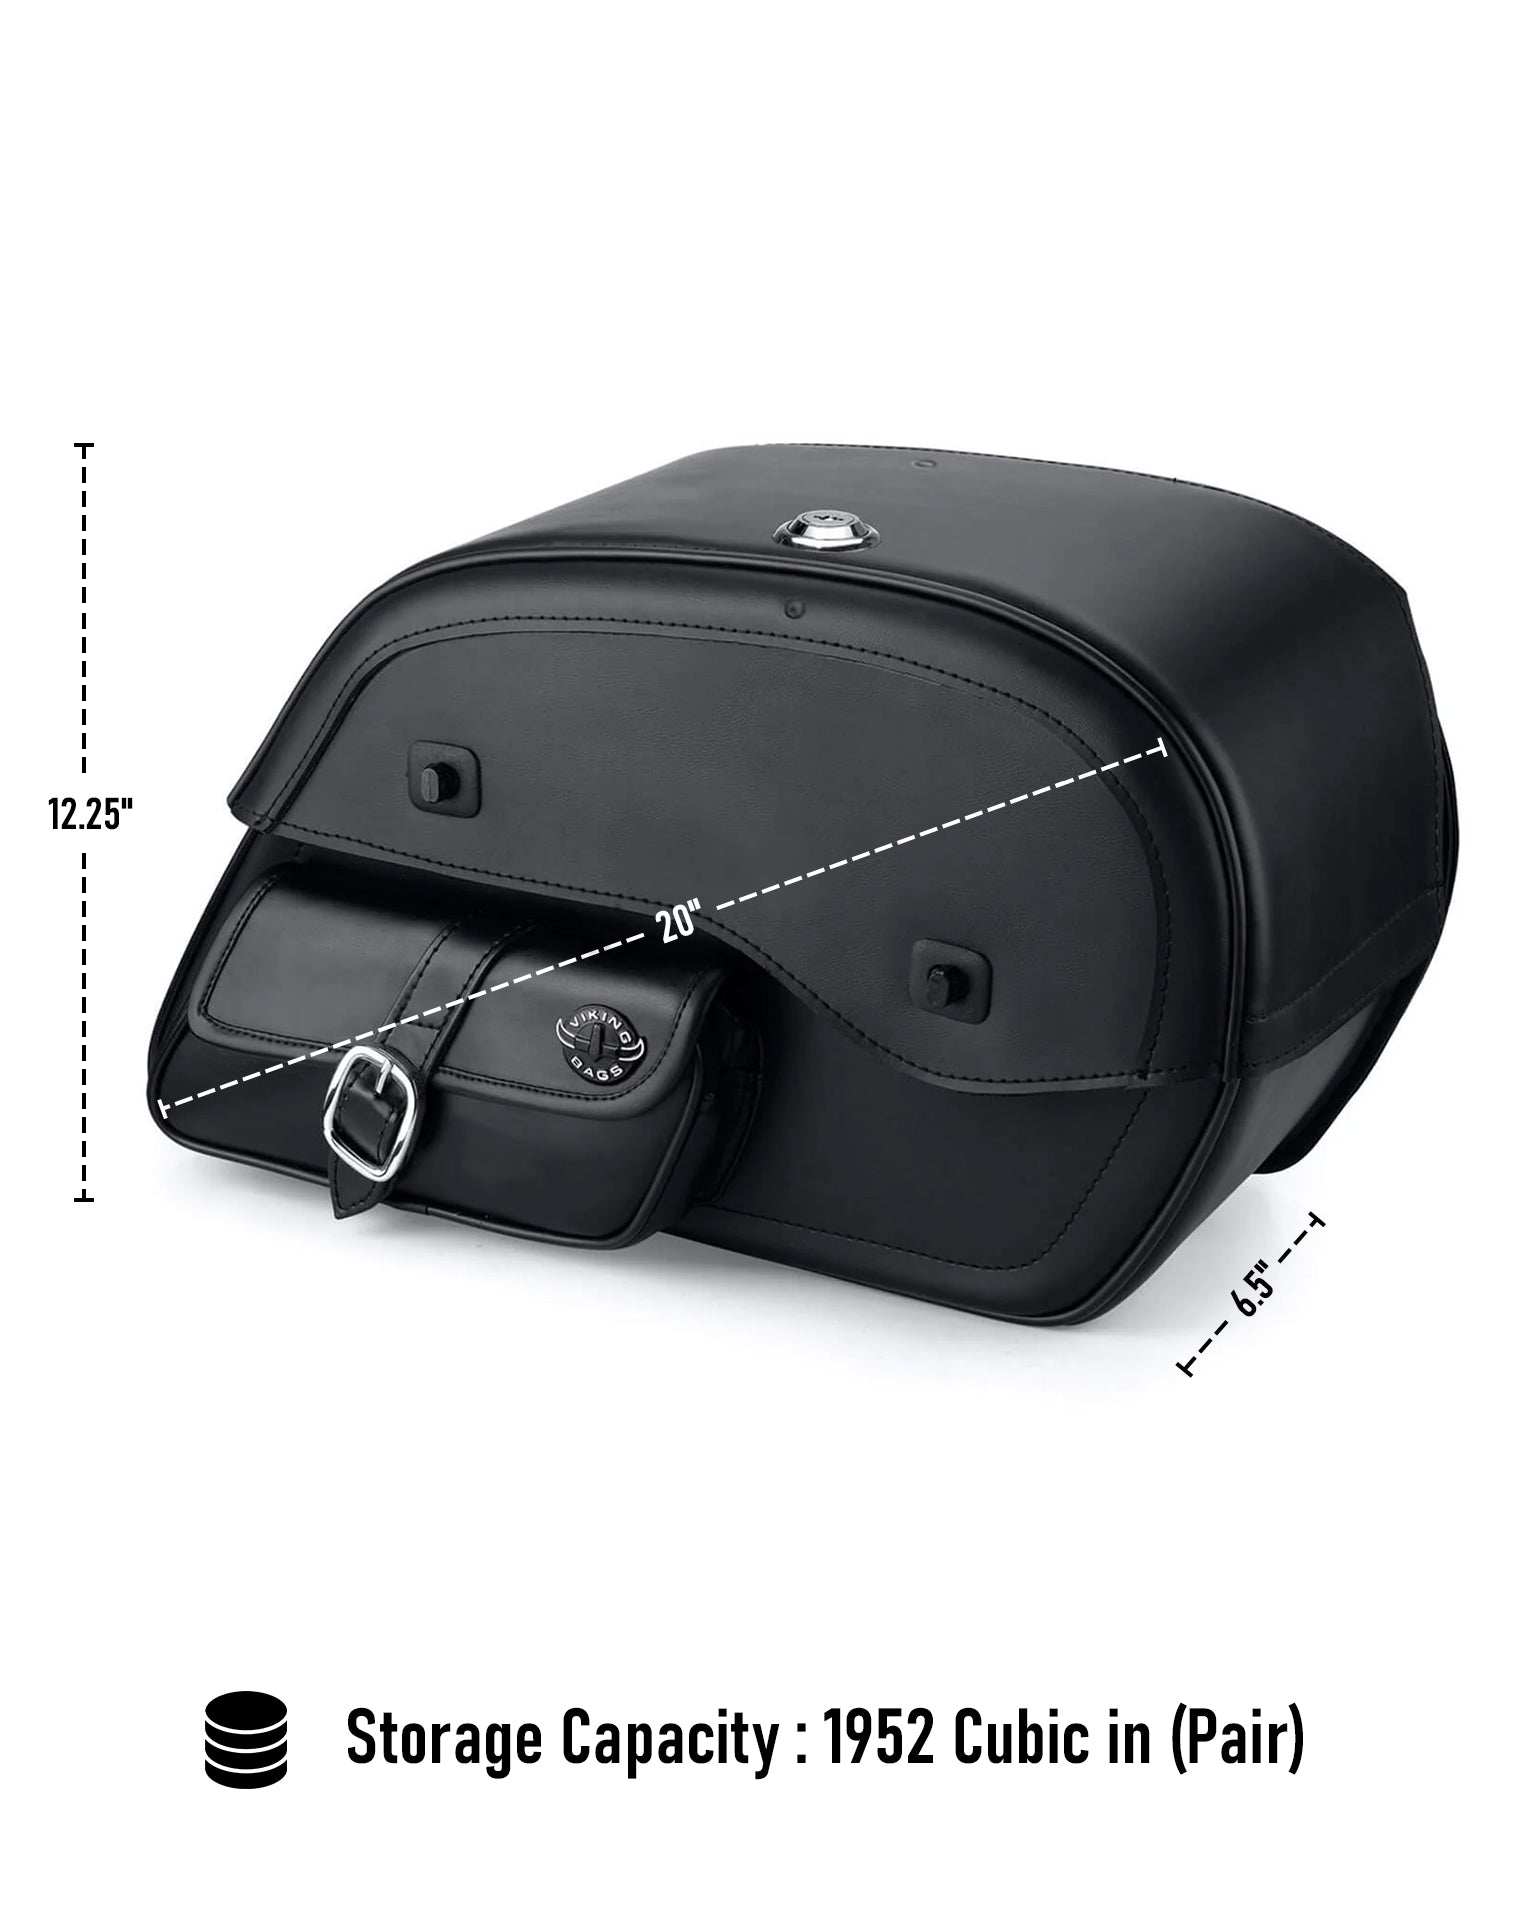 Viking Essential Side Pocket Large Leather Motorcycle Saddlebags For Harley Softail Cross Bones Flstsb Can Store Your Ridings Gears